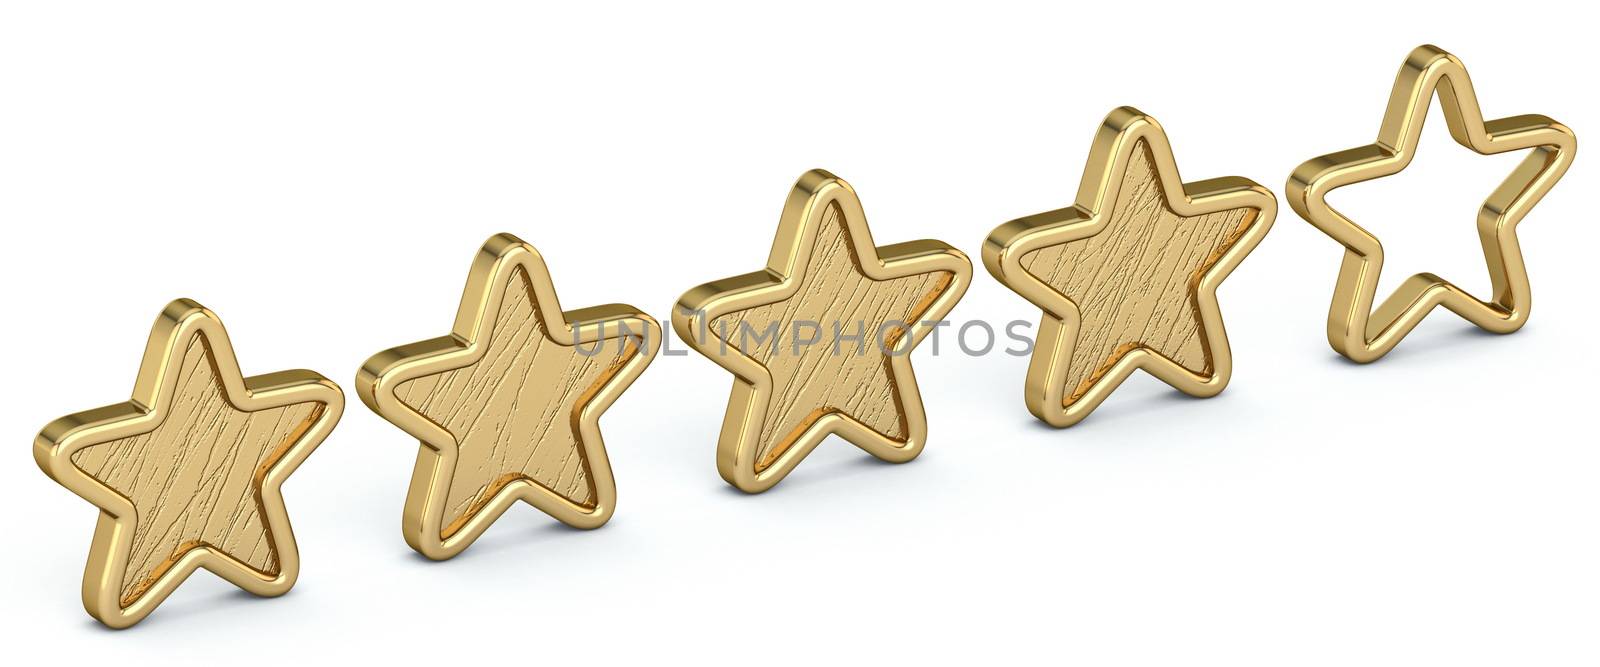 Voting concept rating FOUR golden stars 3D by djmilic